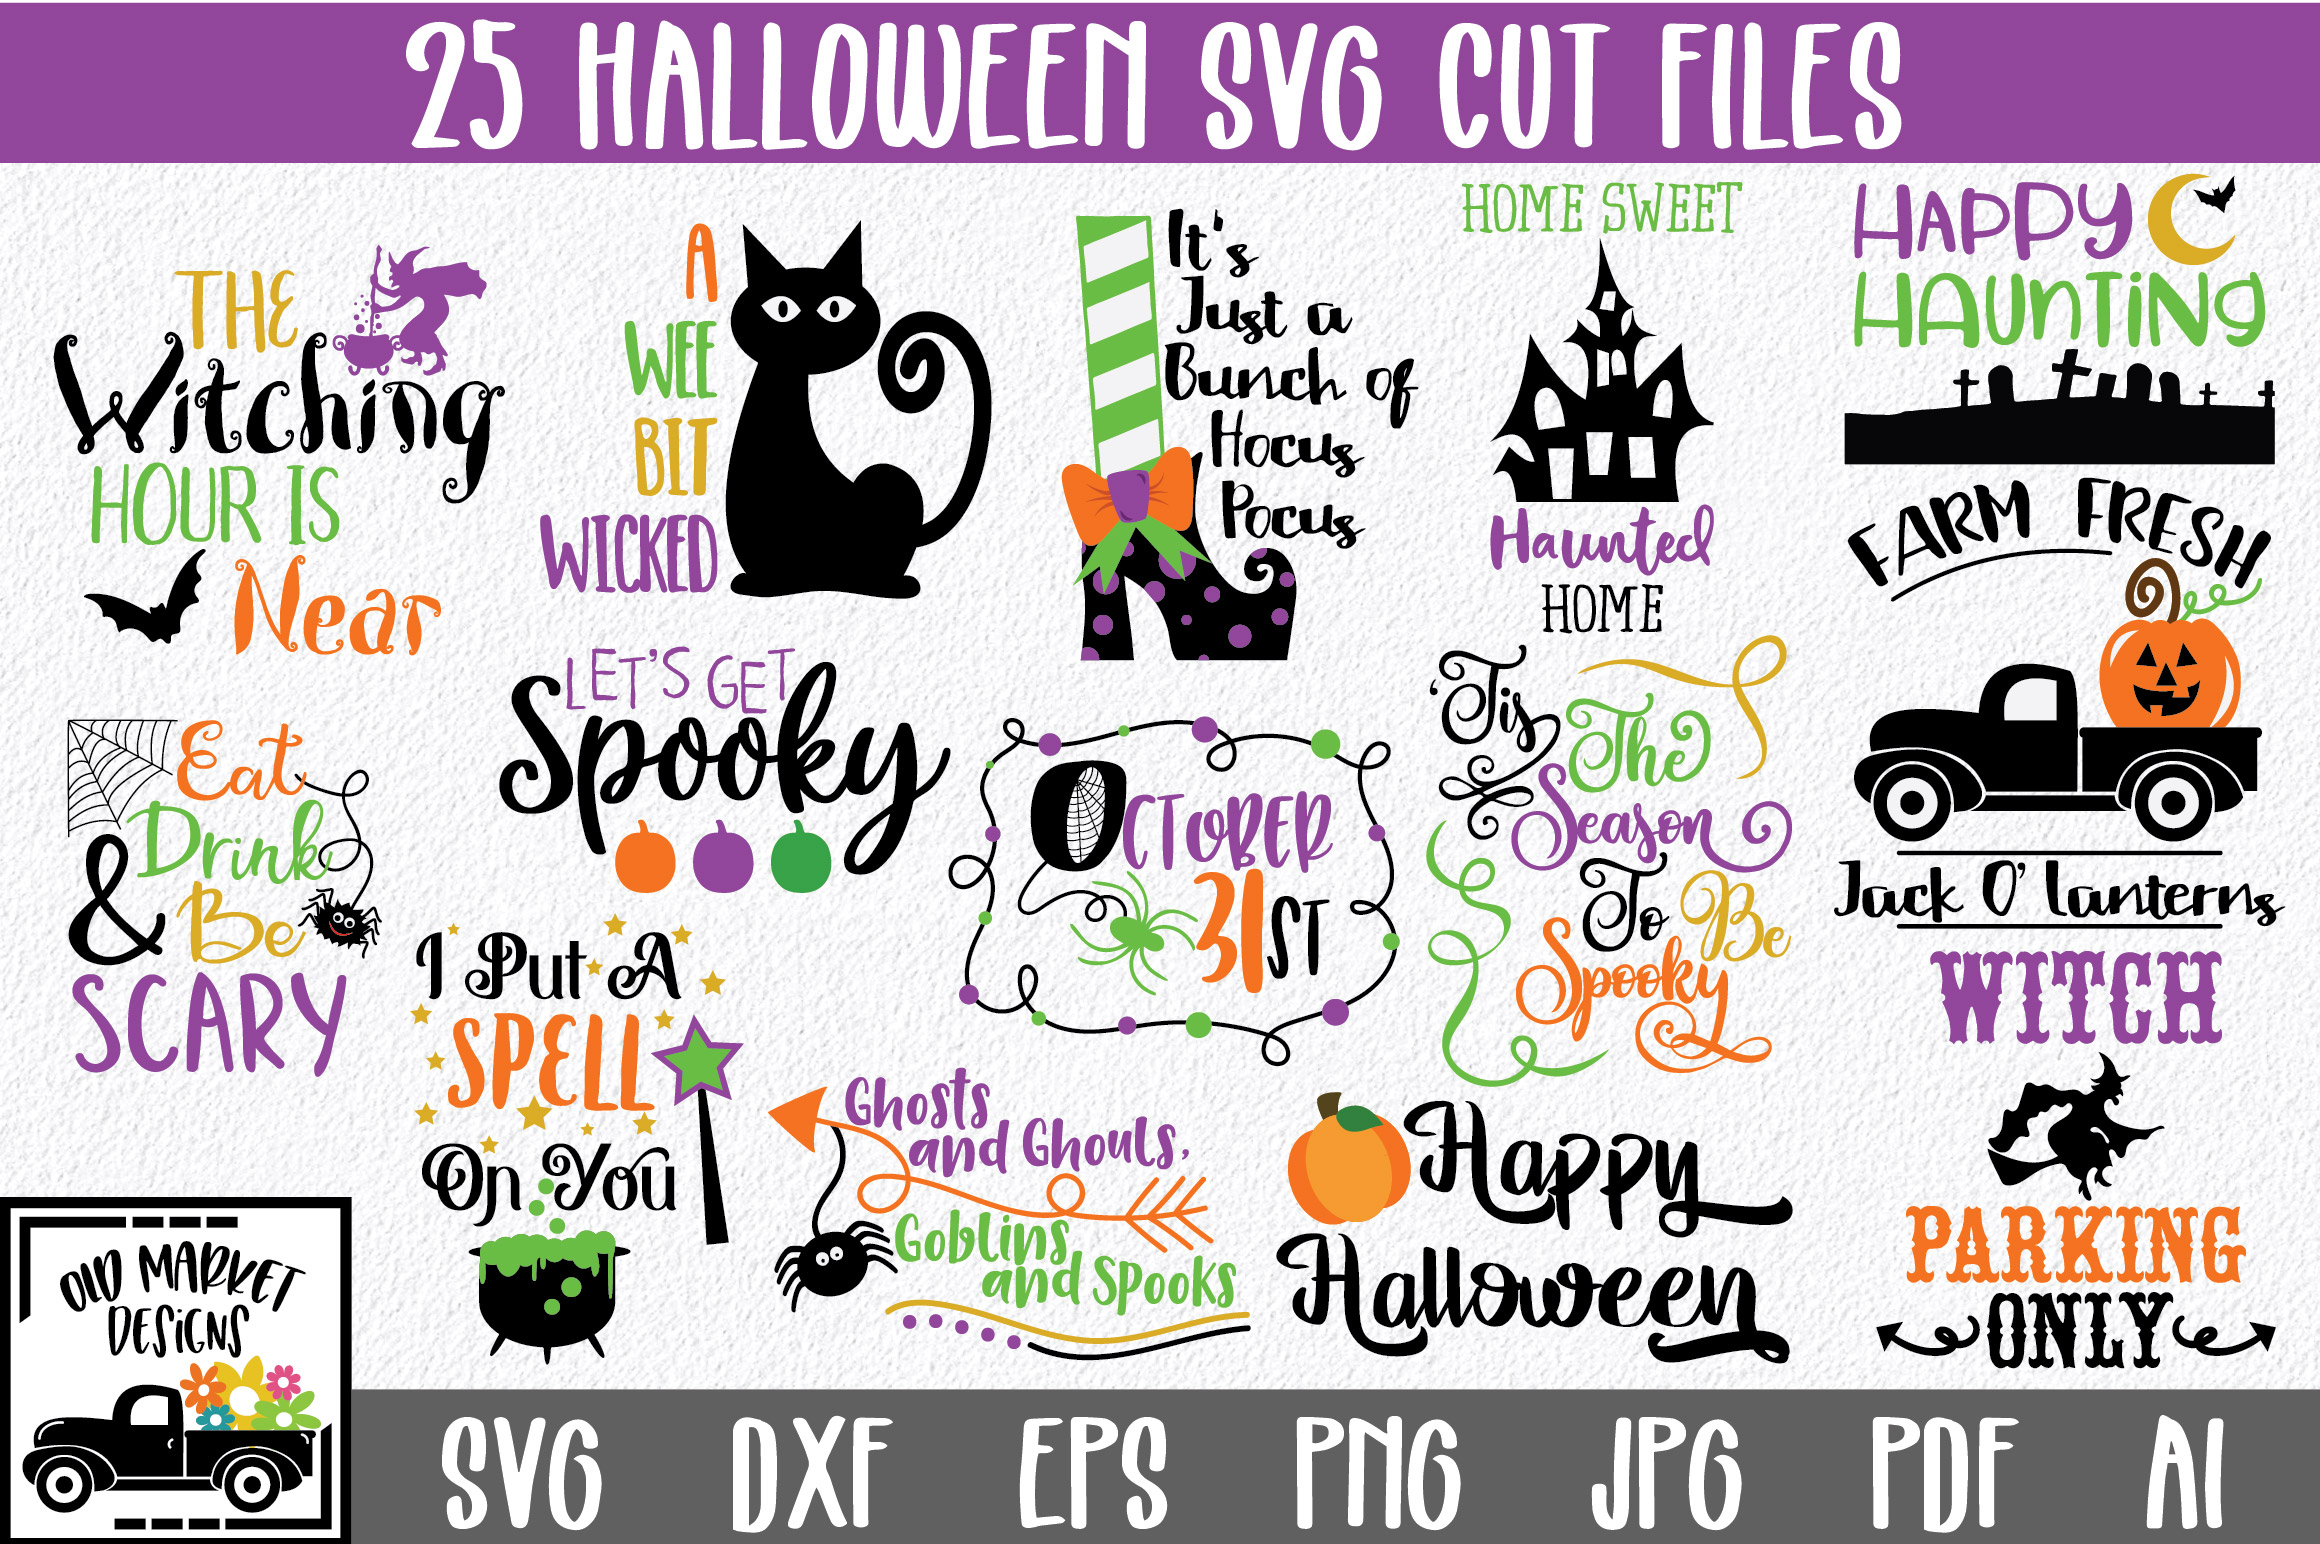 Halloween SVG Bundle with 25 SVG PNG DXF EPS JPG Cut Files